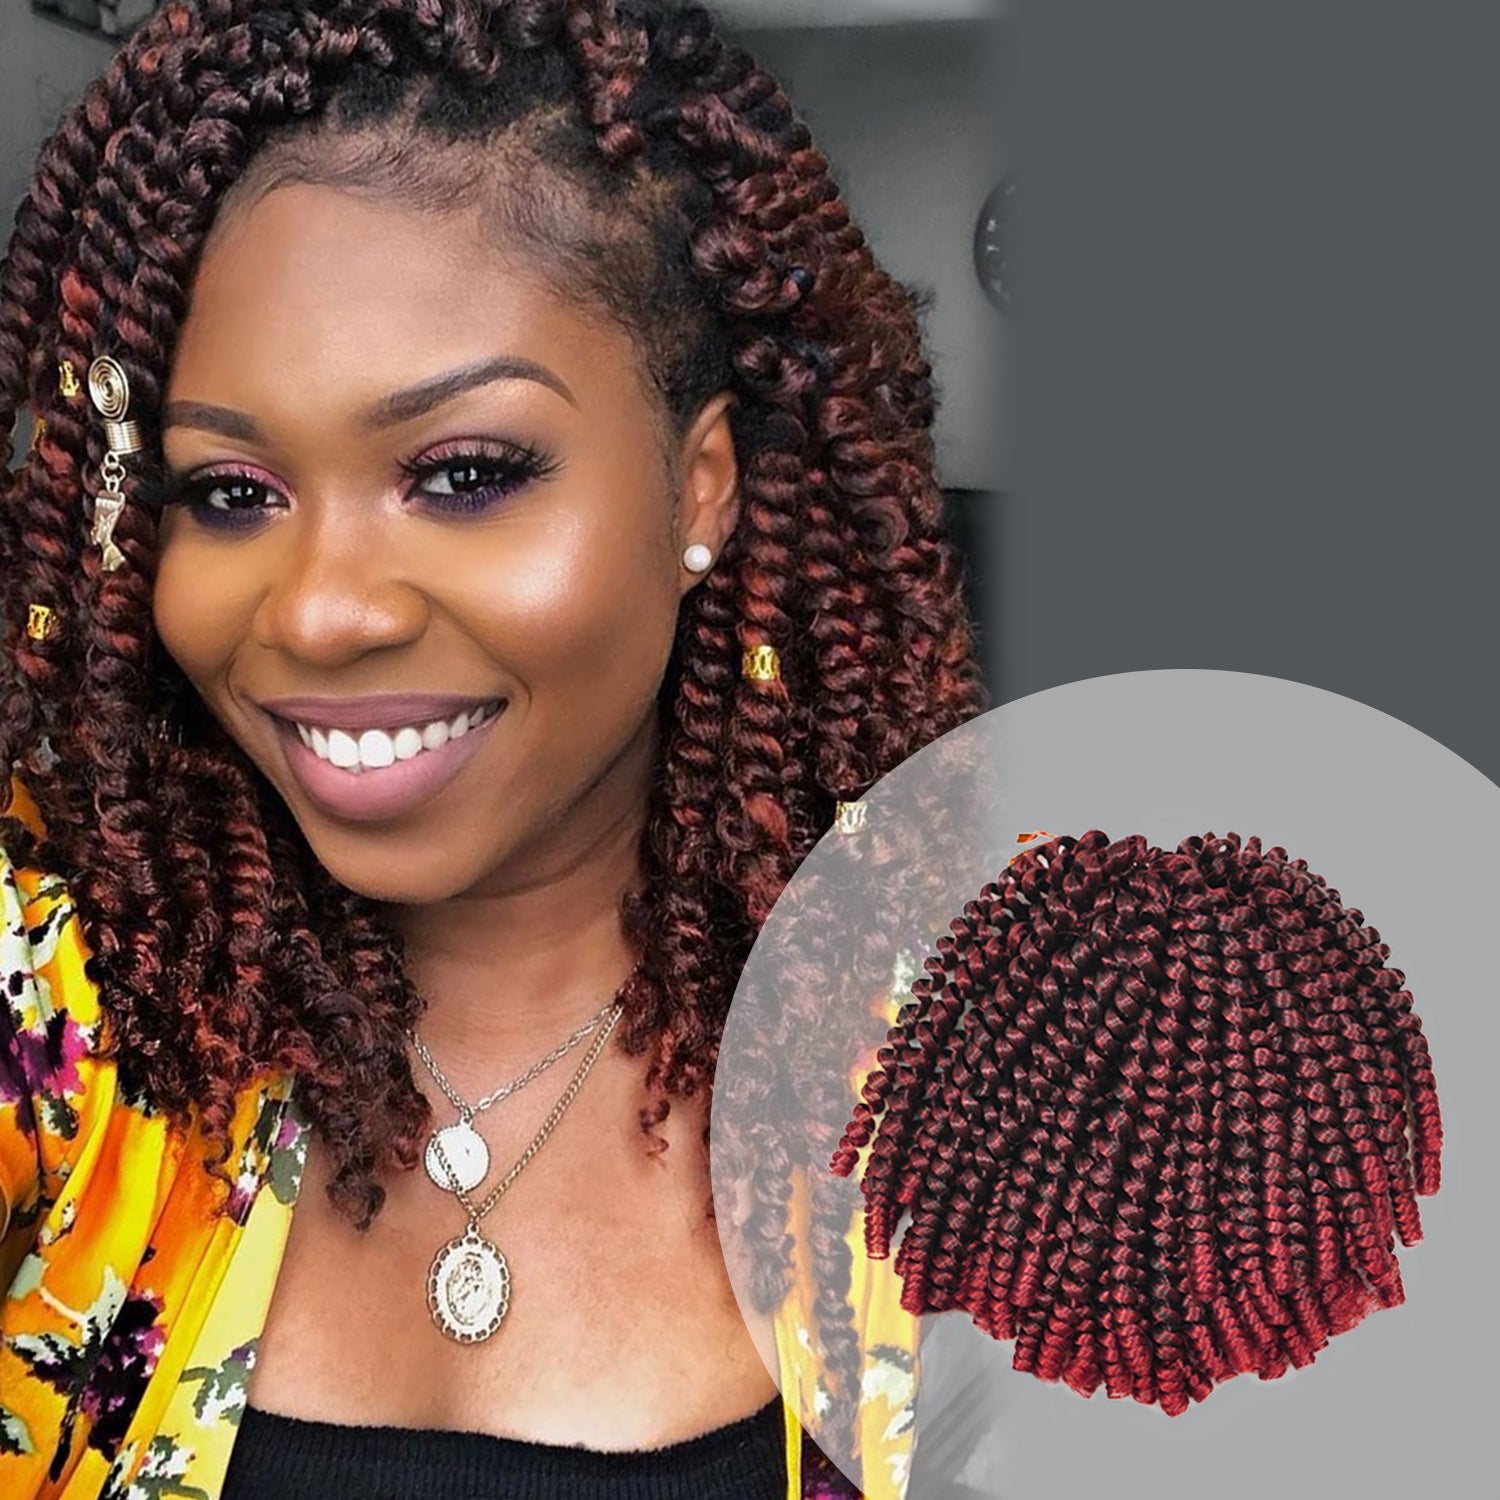 Authentic Synthetic Hair Crochet Braids Passion Spring Twist 8"